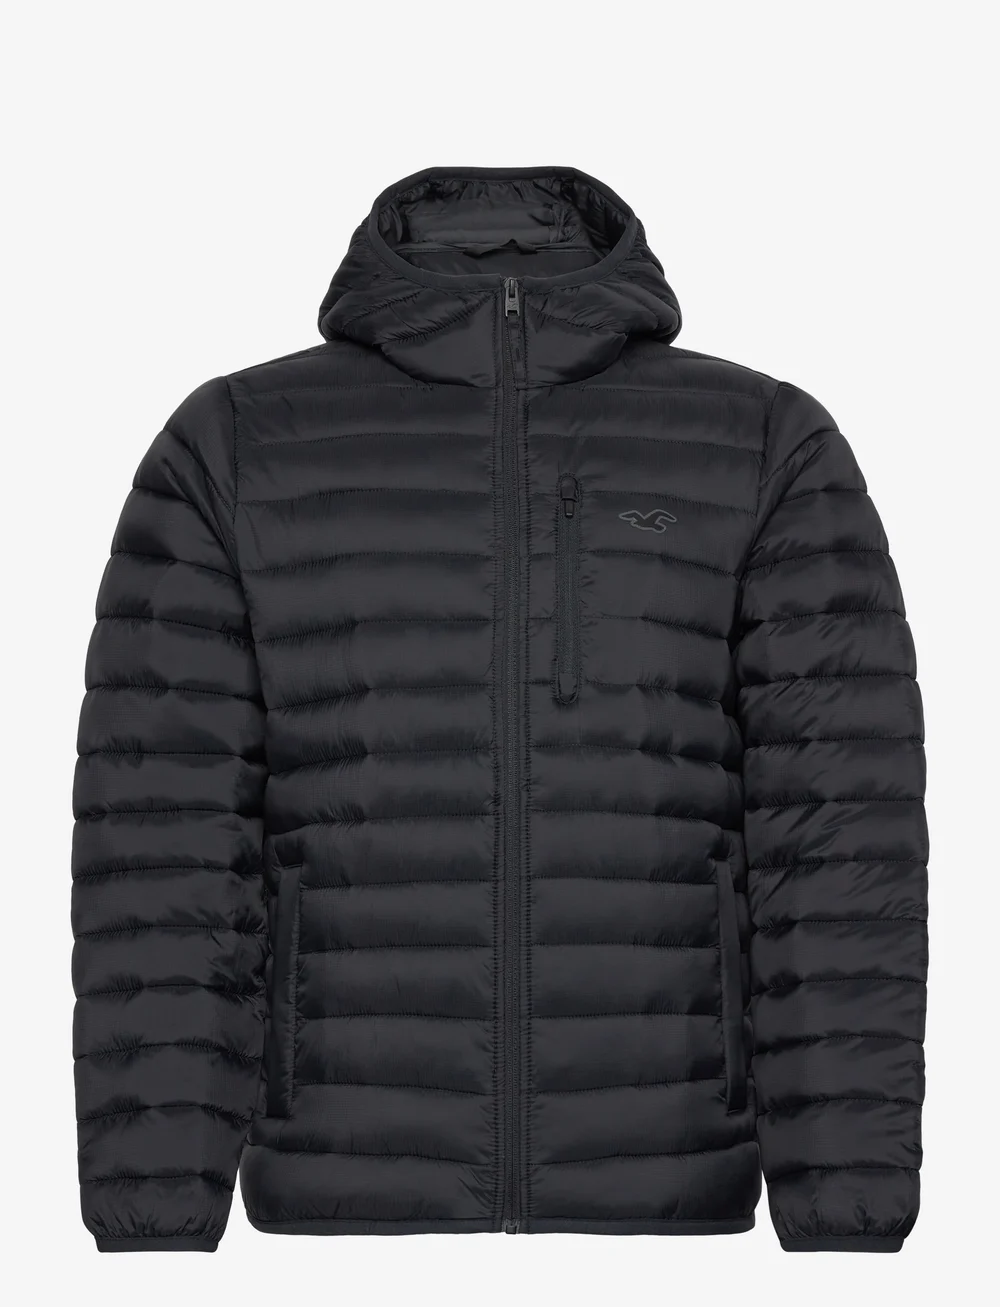 Hollister Hco. Guys Outerwear – jackets & coats – shop at Booztlet